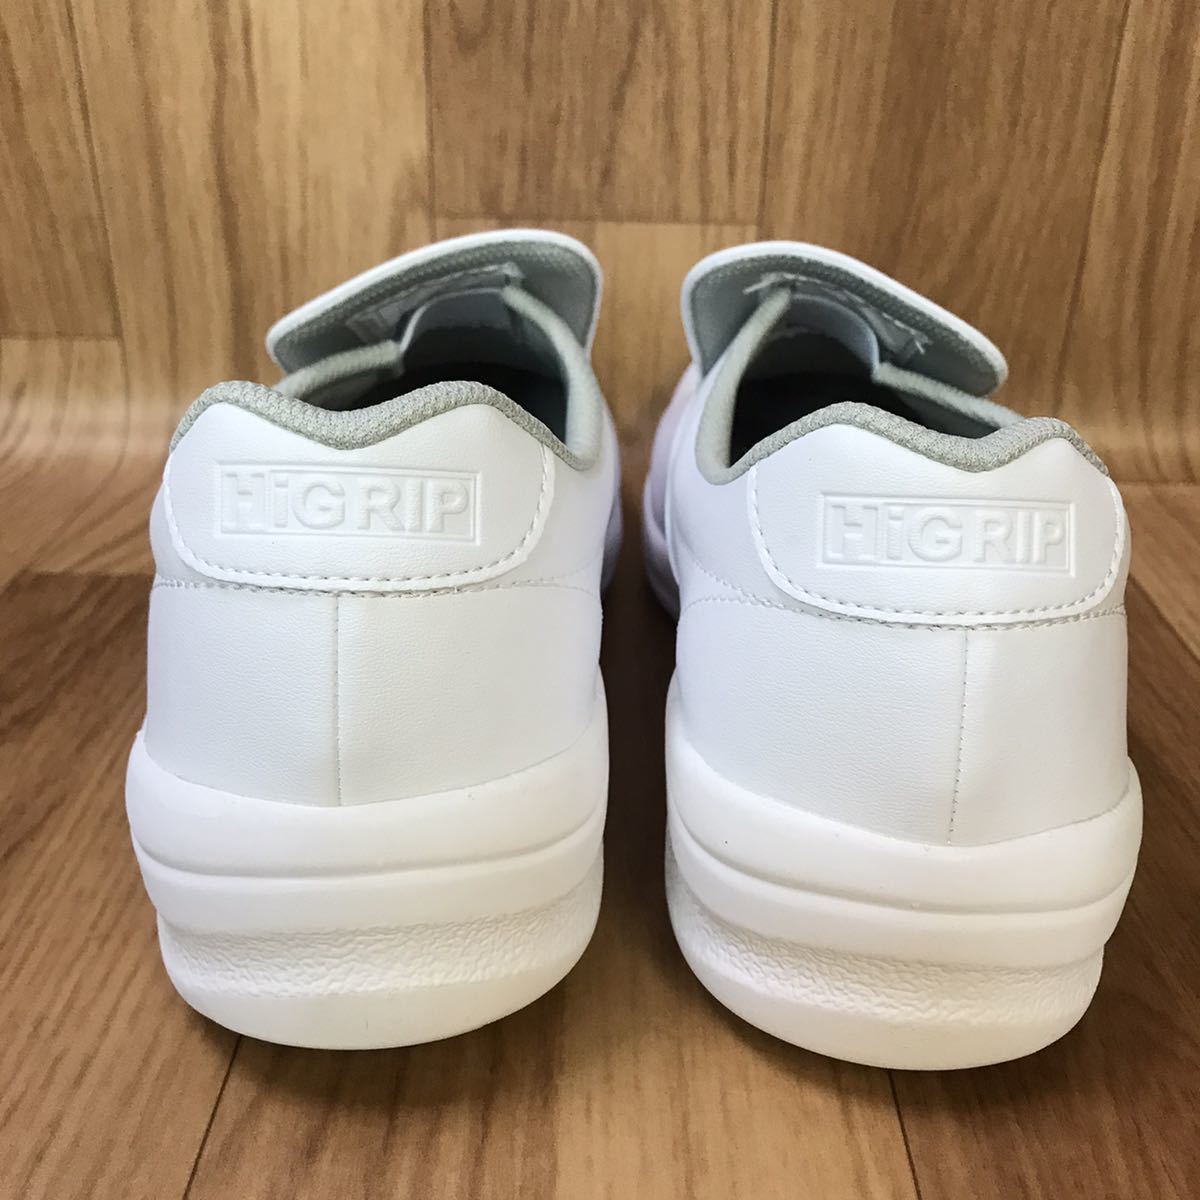  free shipping / unused goods / green safety resin . core super enduring slide work shoes HigRIP high grip super NHS-600 white 27.5cm/ high grip sole safety shoes 